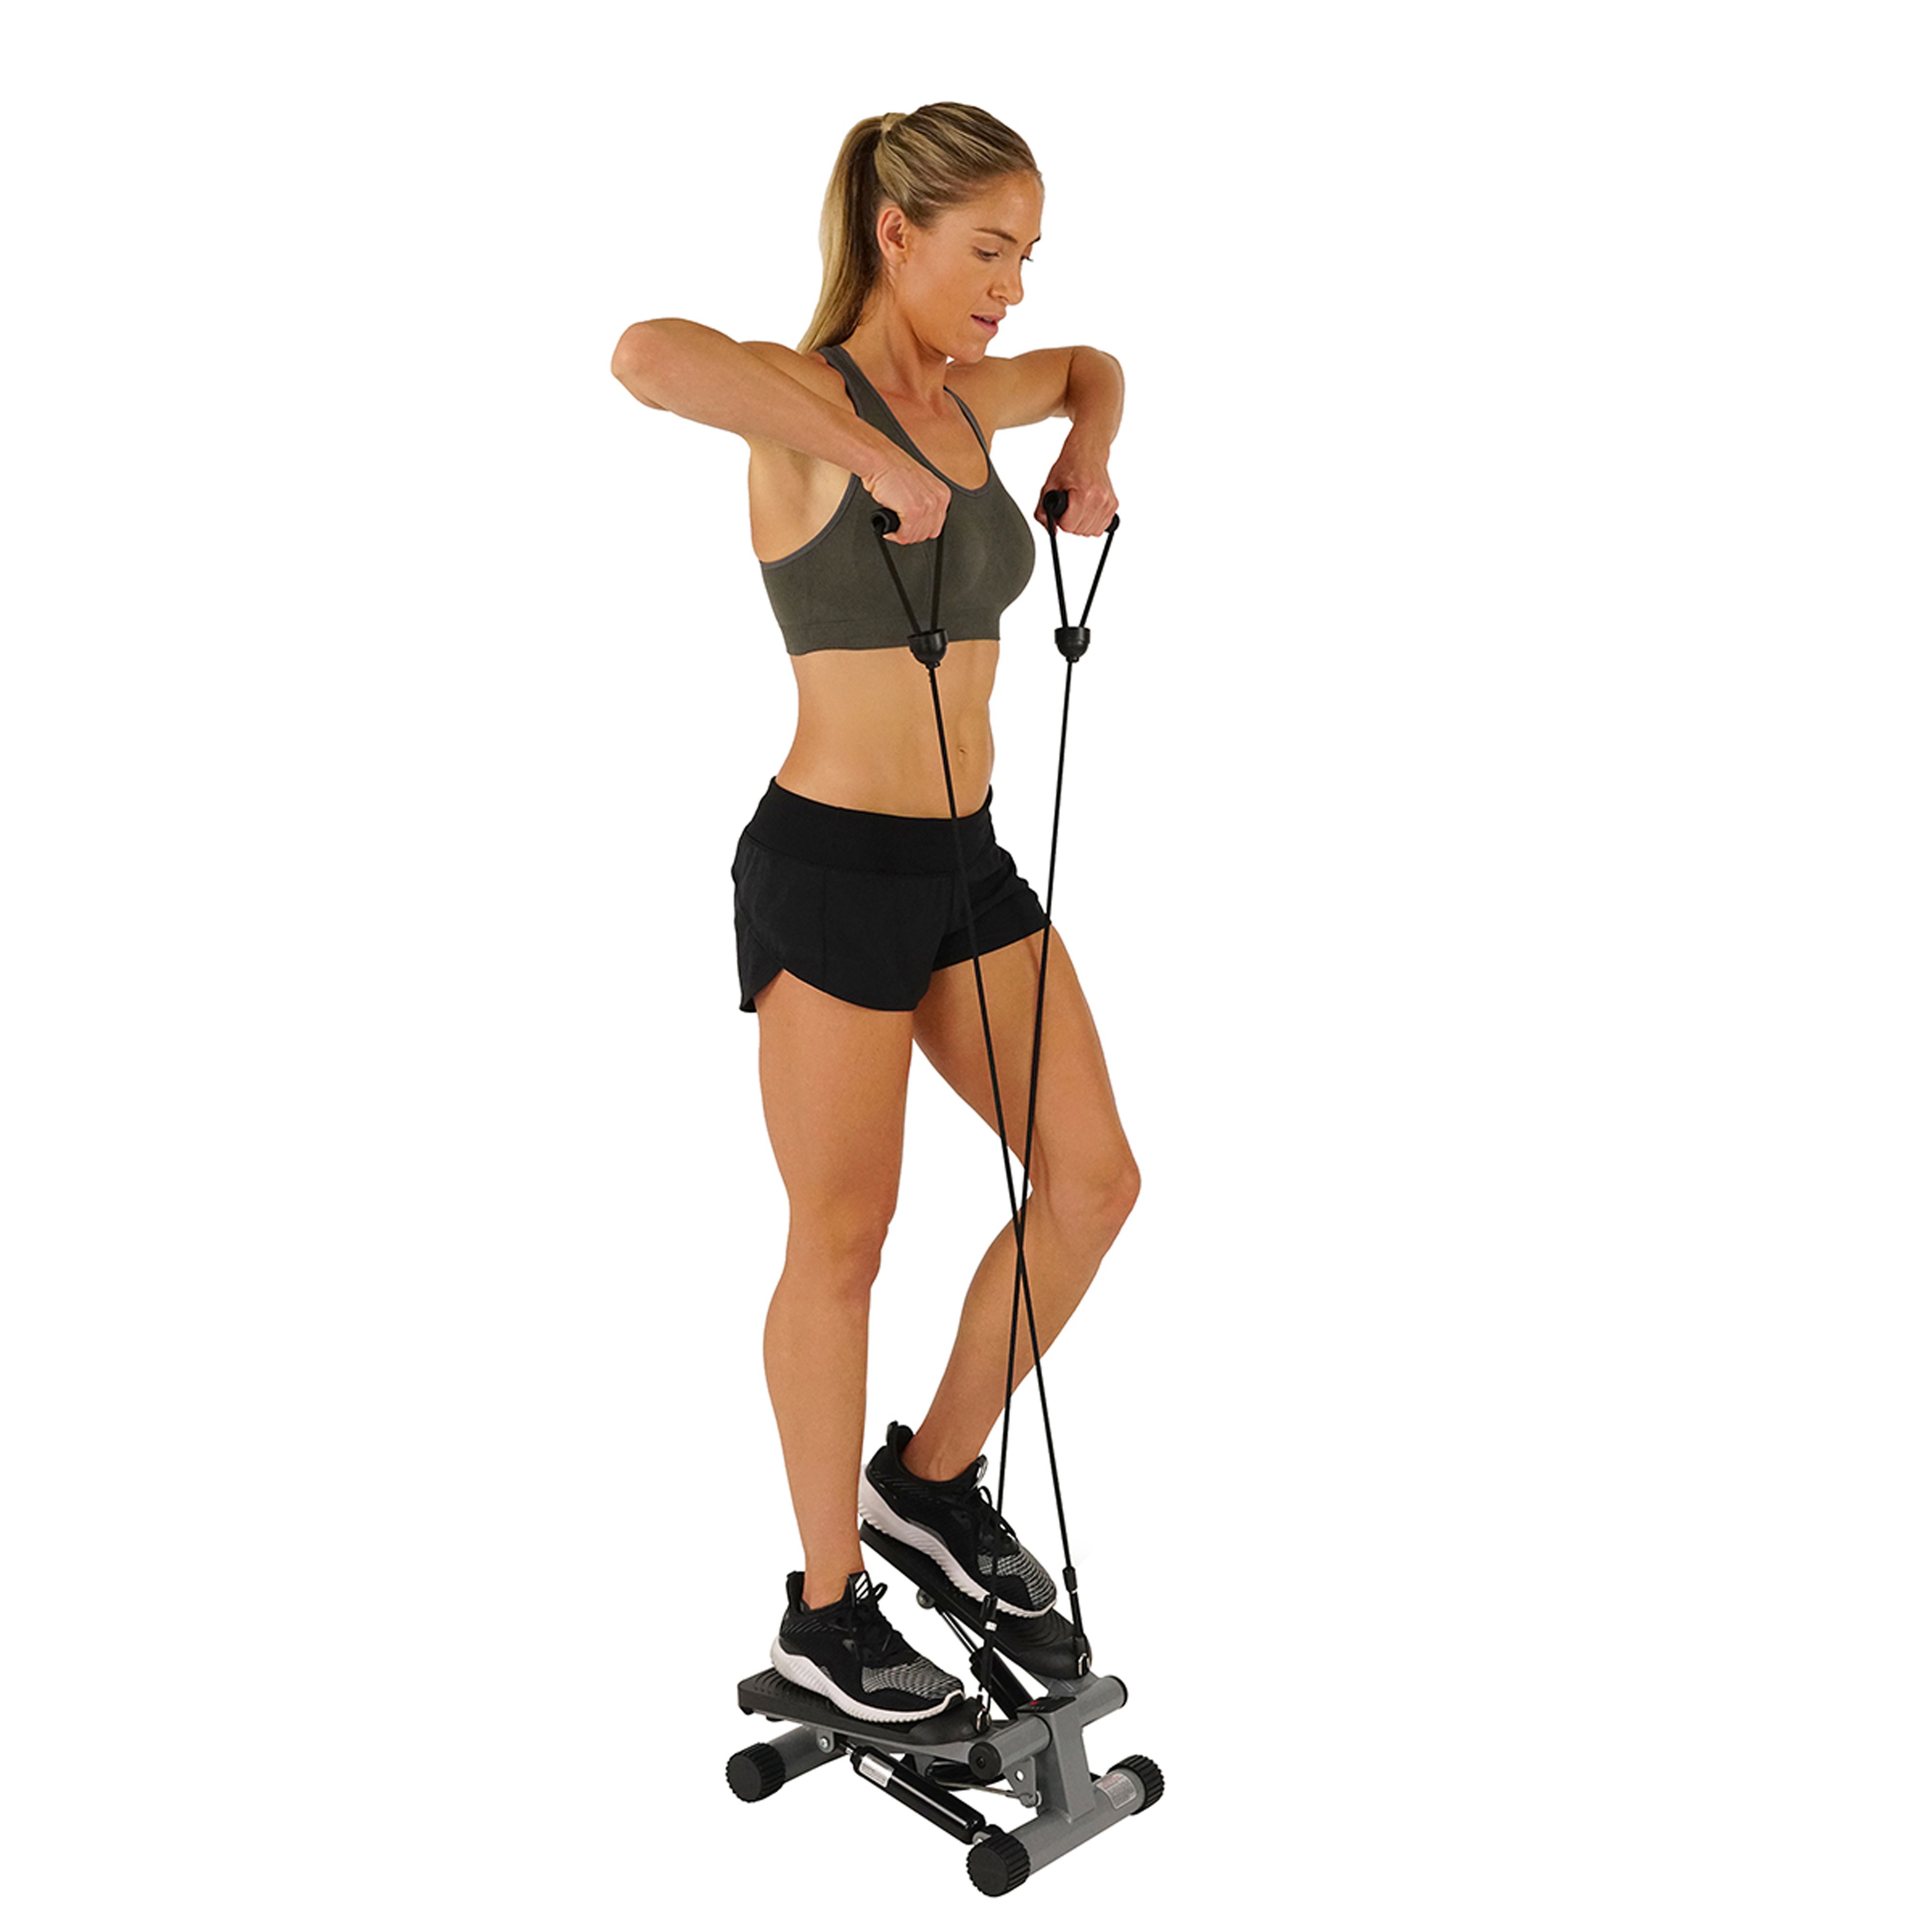 Aerobic Exercise Stepper,Adjustable LCD Home Gym Workout Equipment Aerobic Step,2